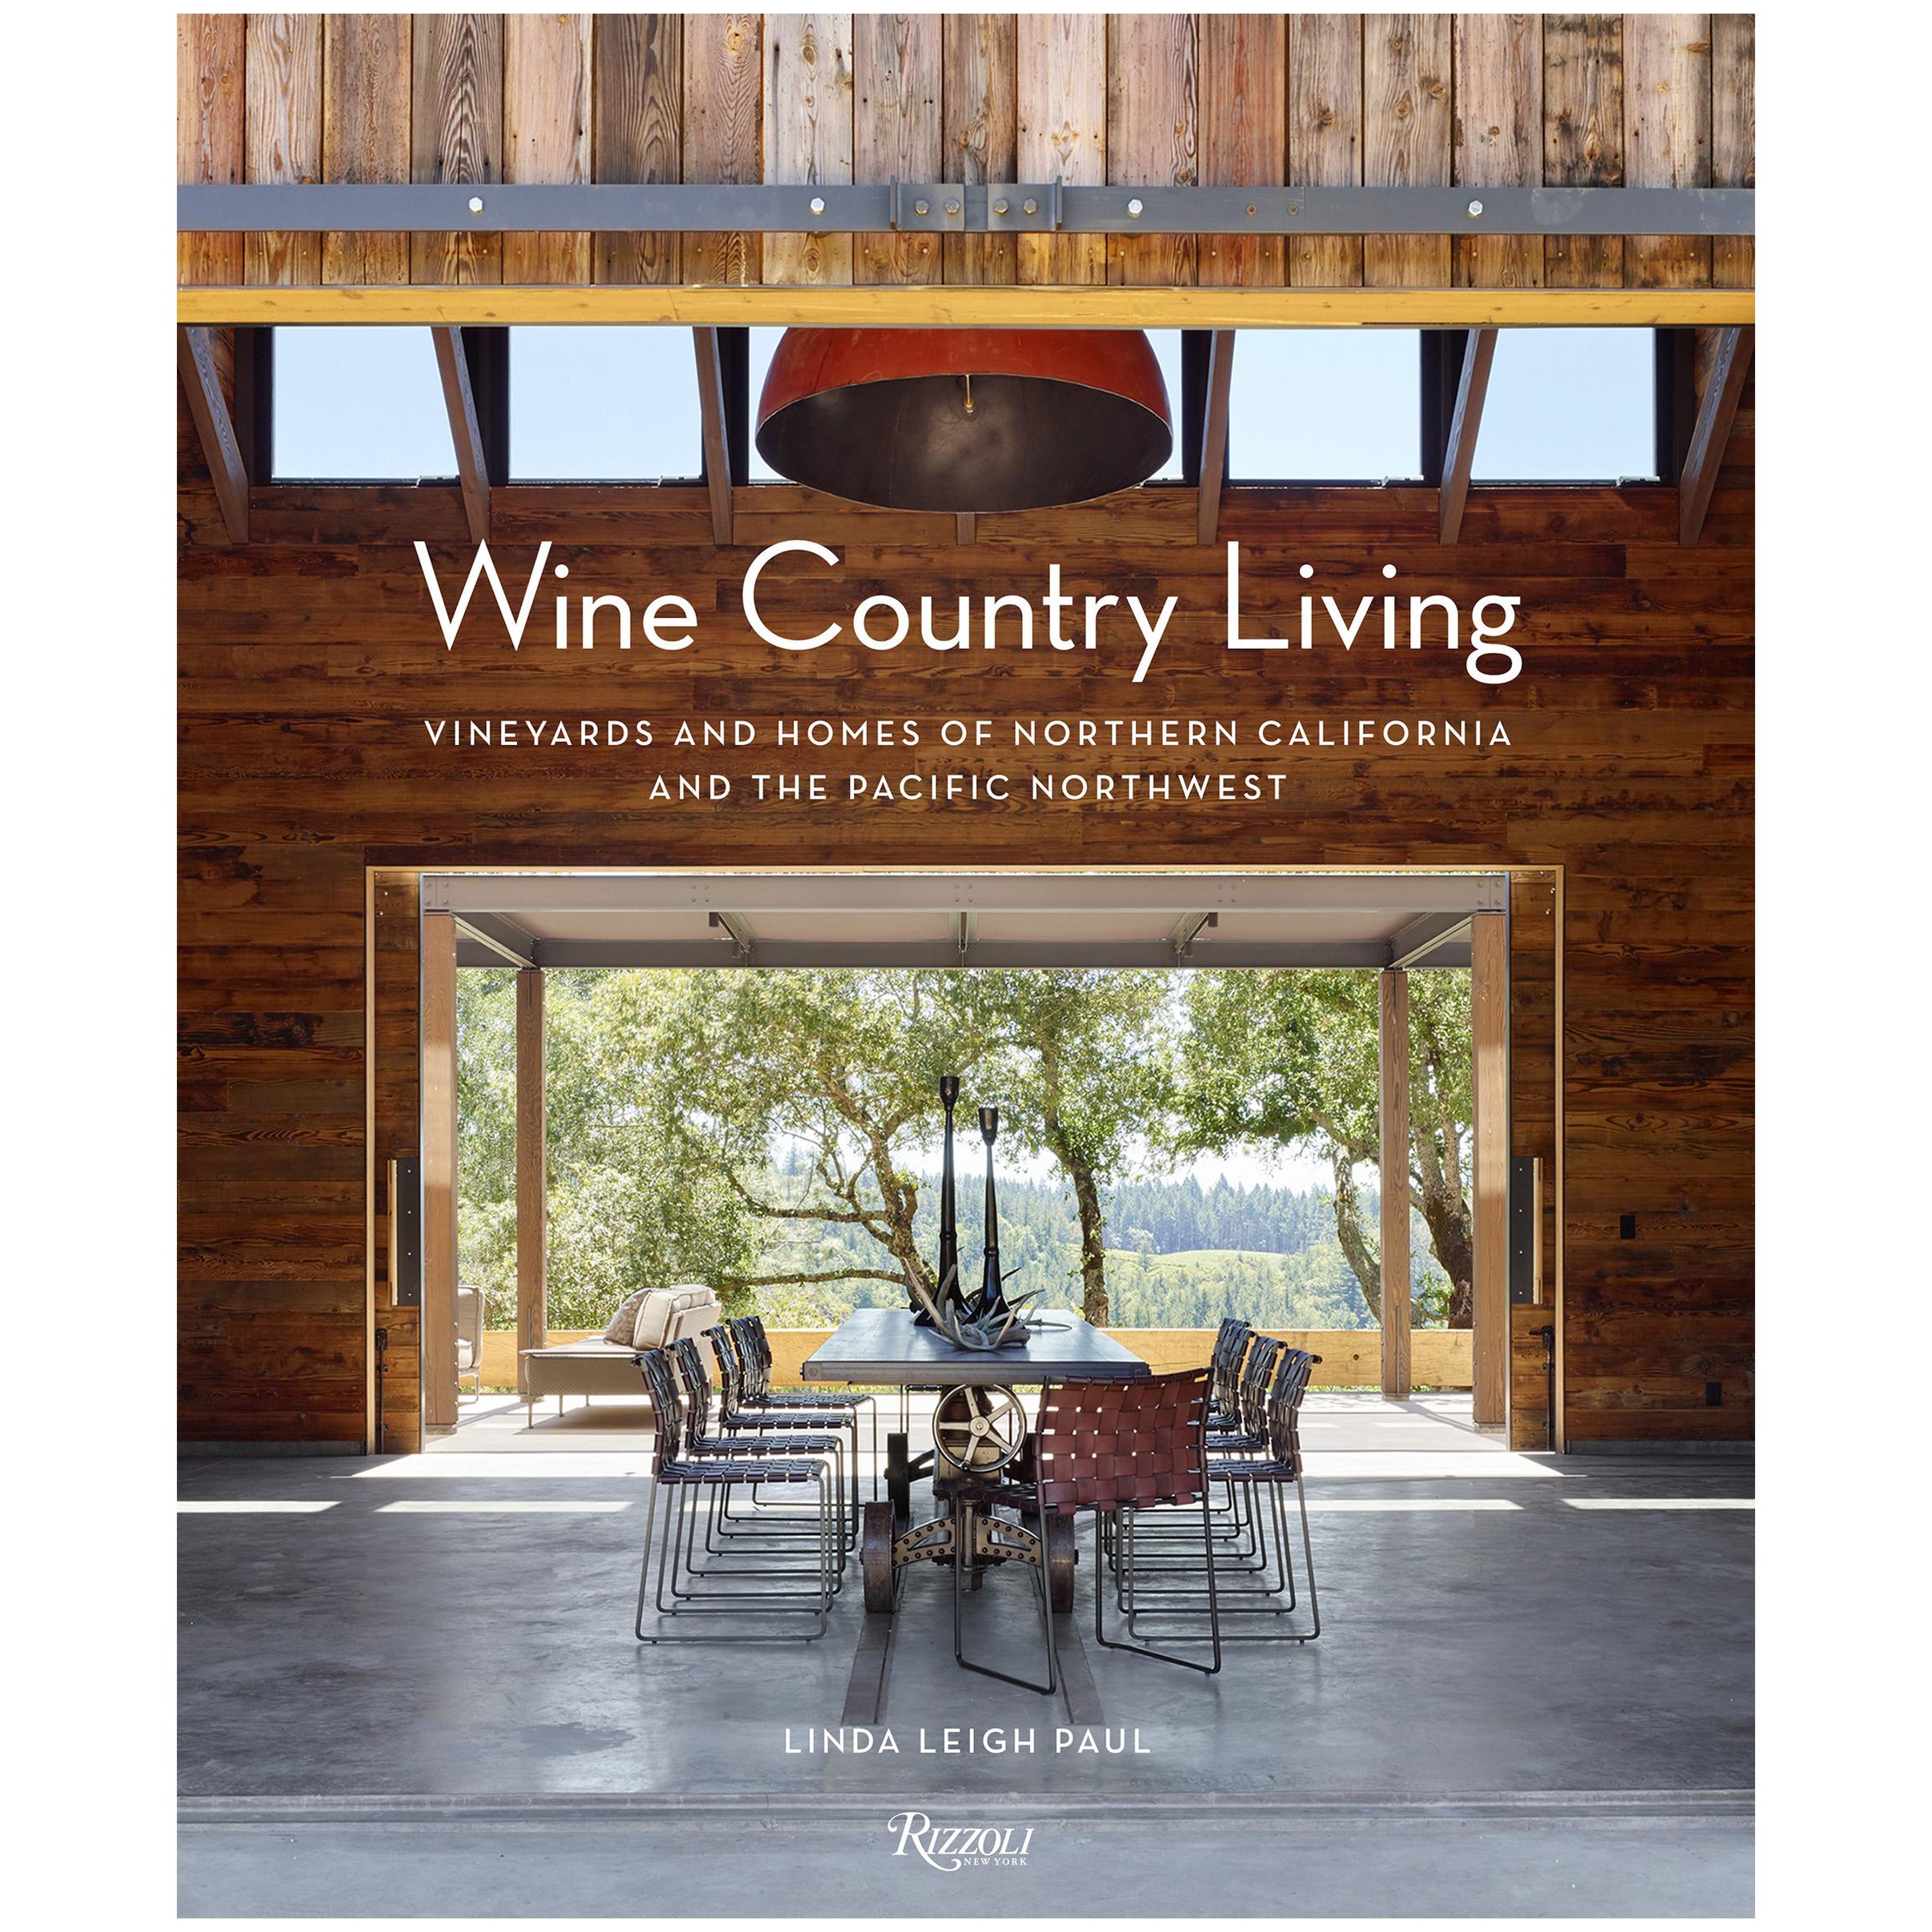 Wine Country Living Vineyards and Homes of Northern California and the Pacific